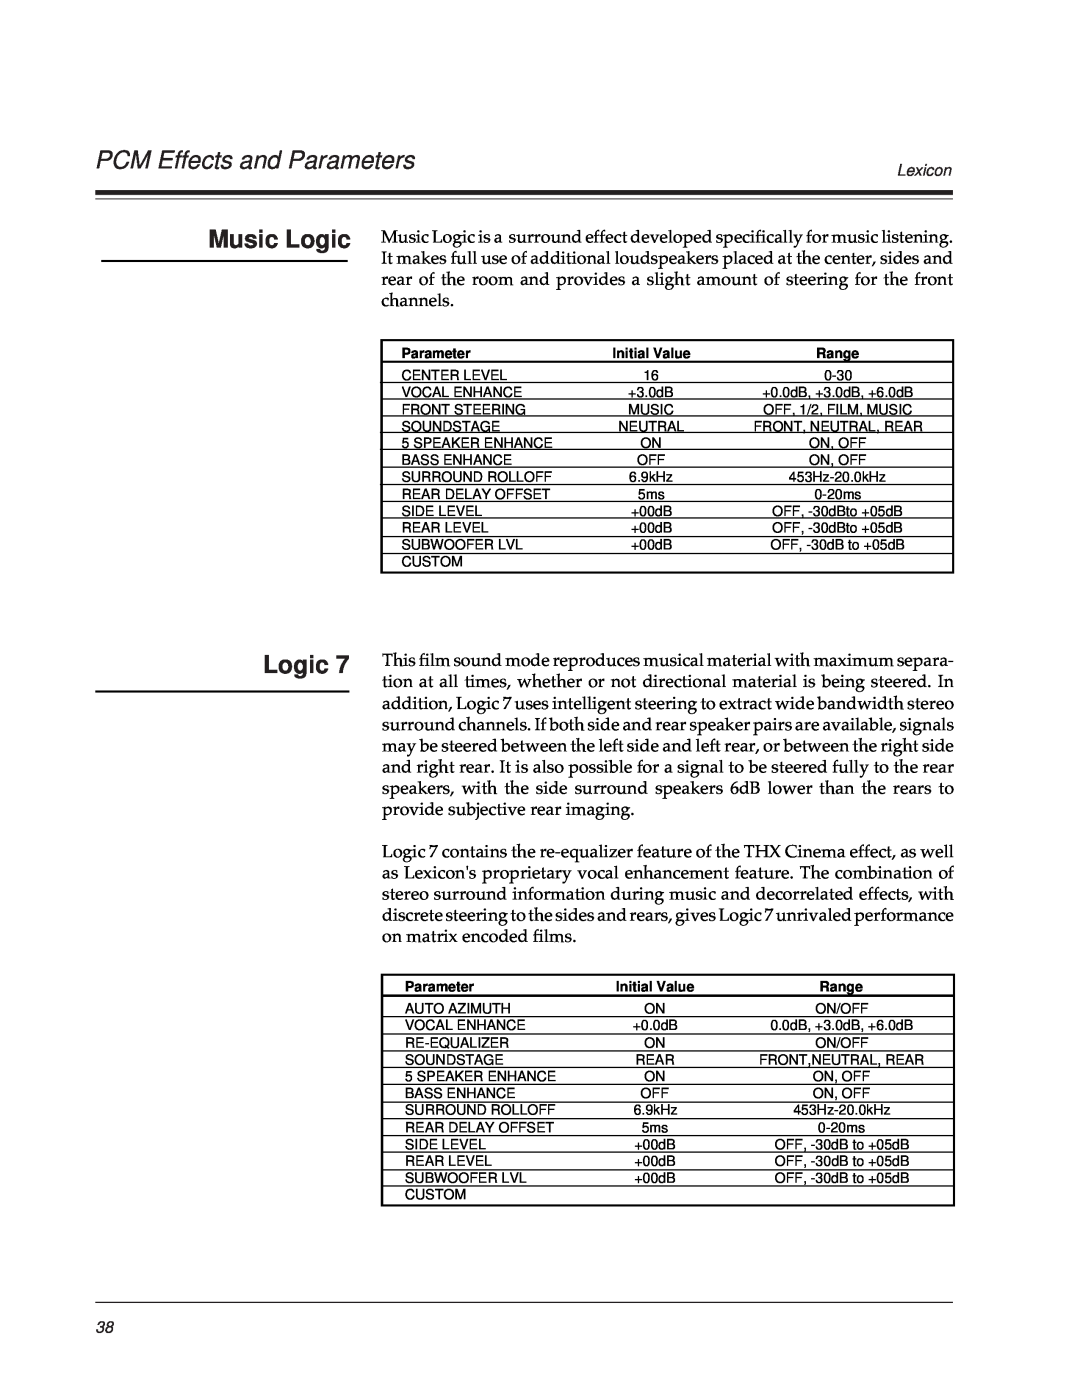 Lexicon DC-2 owner manual Music Logic, PCM Effects and Parameters 